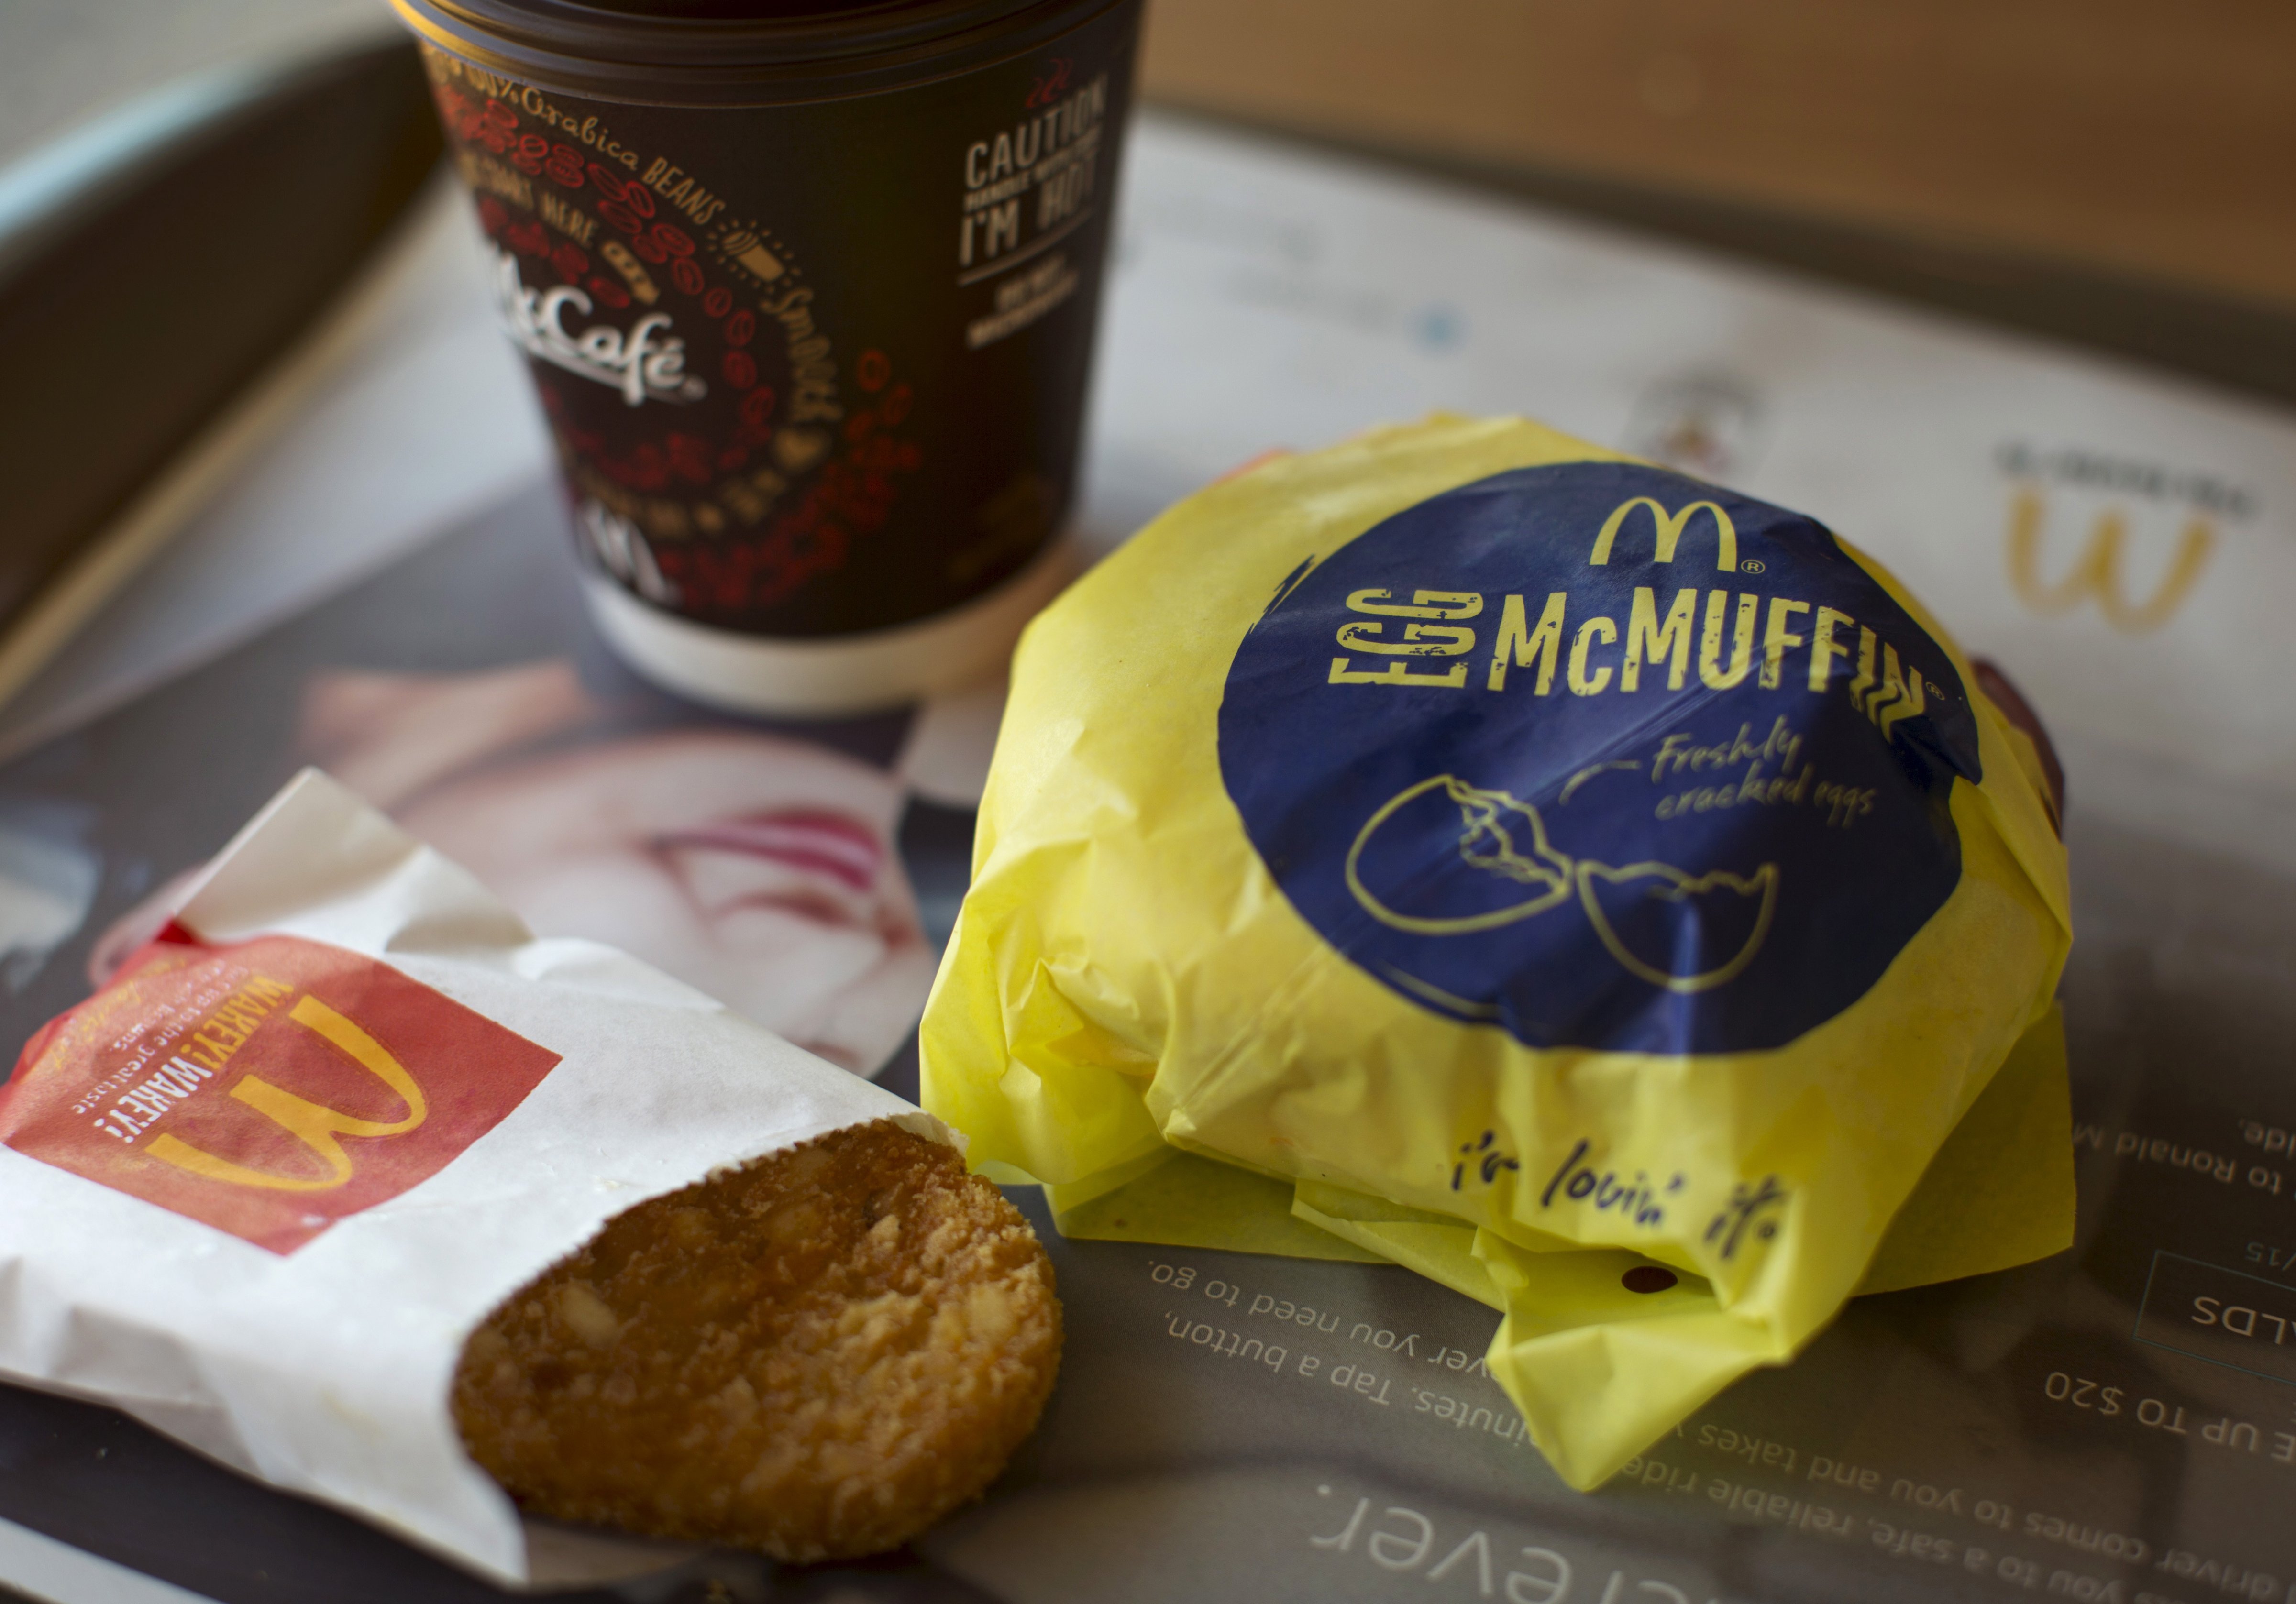 An Egg McMuffin meal is pictured at a McDonald's restaurant in Encinitas, Calif. on Aug. 13, 2015. (Mike Blake—Reuters)